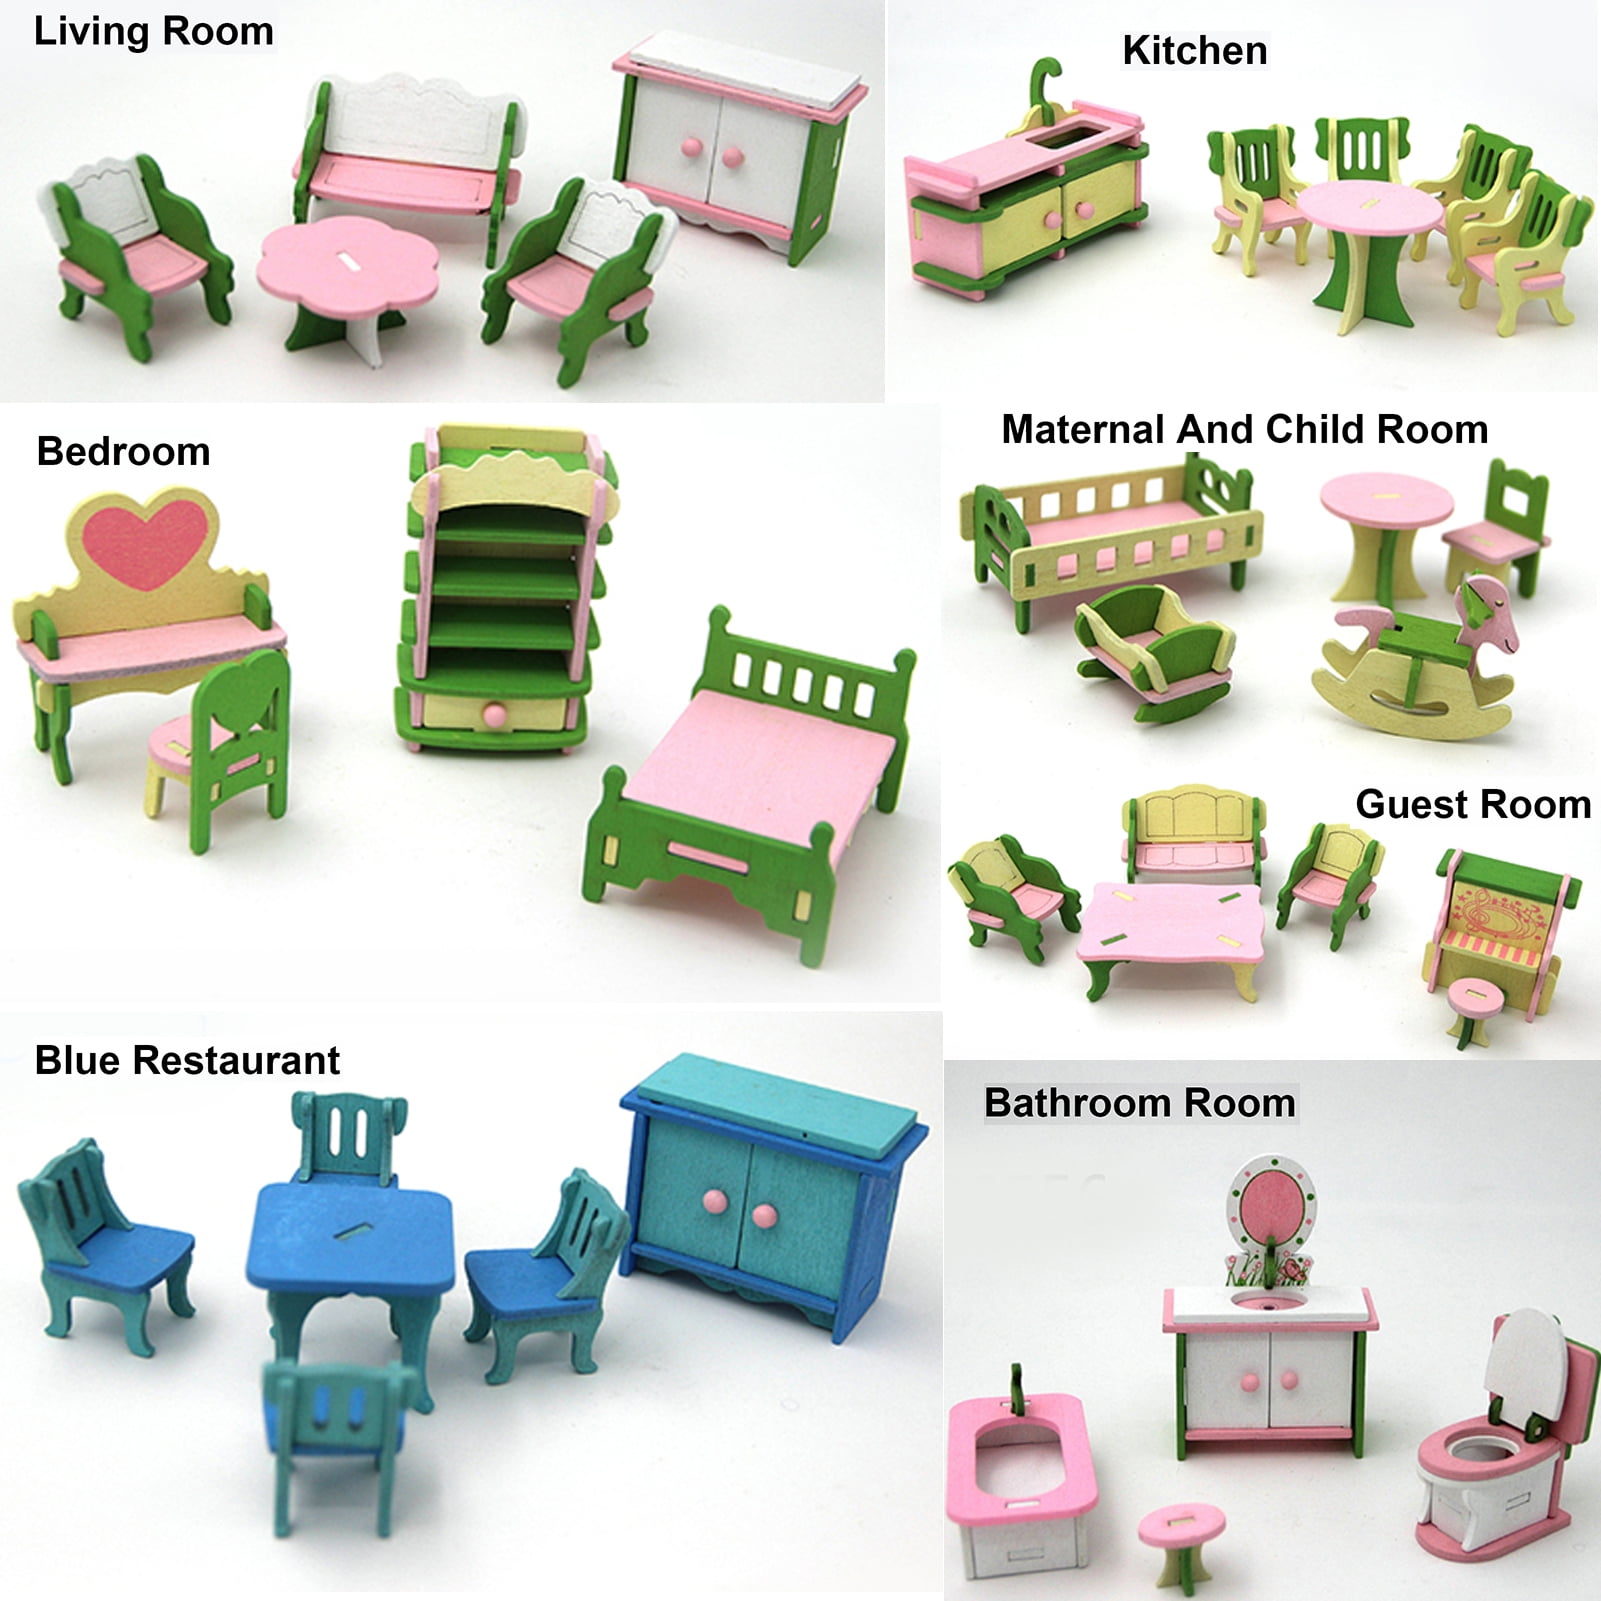 Wooden Doll House Miniature Bedroom Furniture Set Kids Children Role Play Toy 